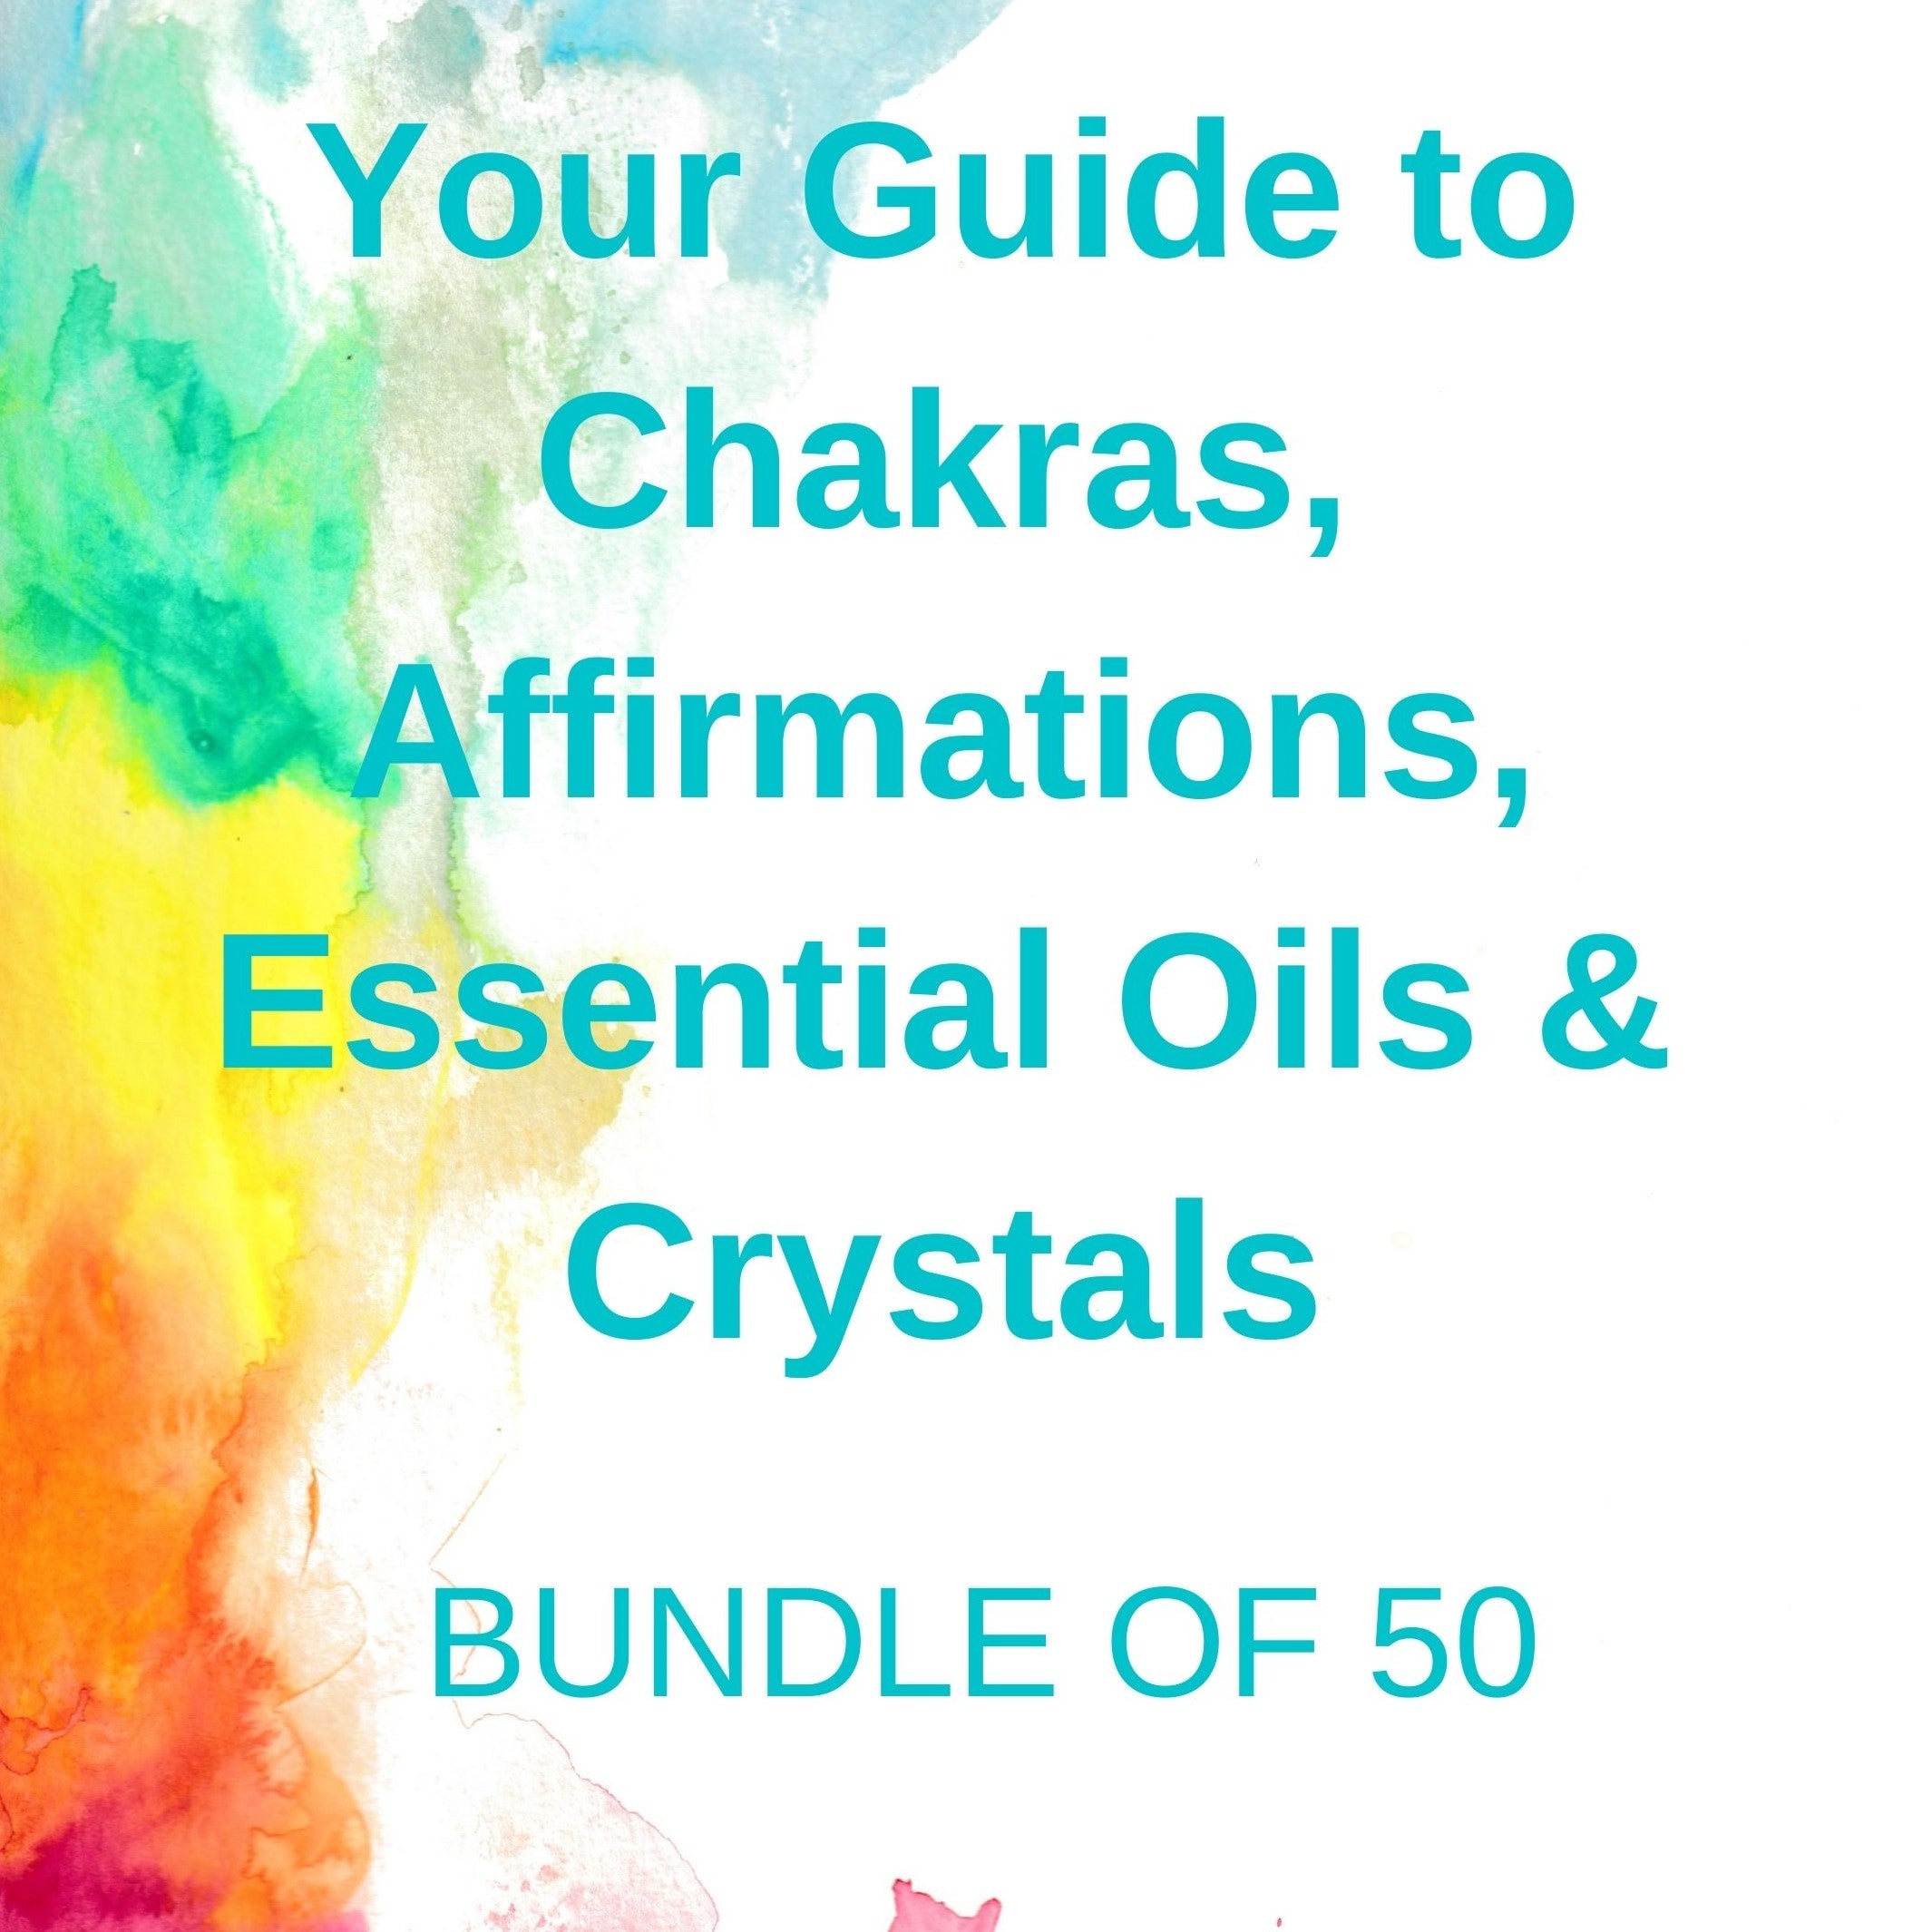 Your Guide to Chakras, Affirmations, Essential Oils & Crystals Bundle of 50 guides